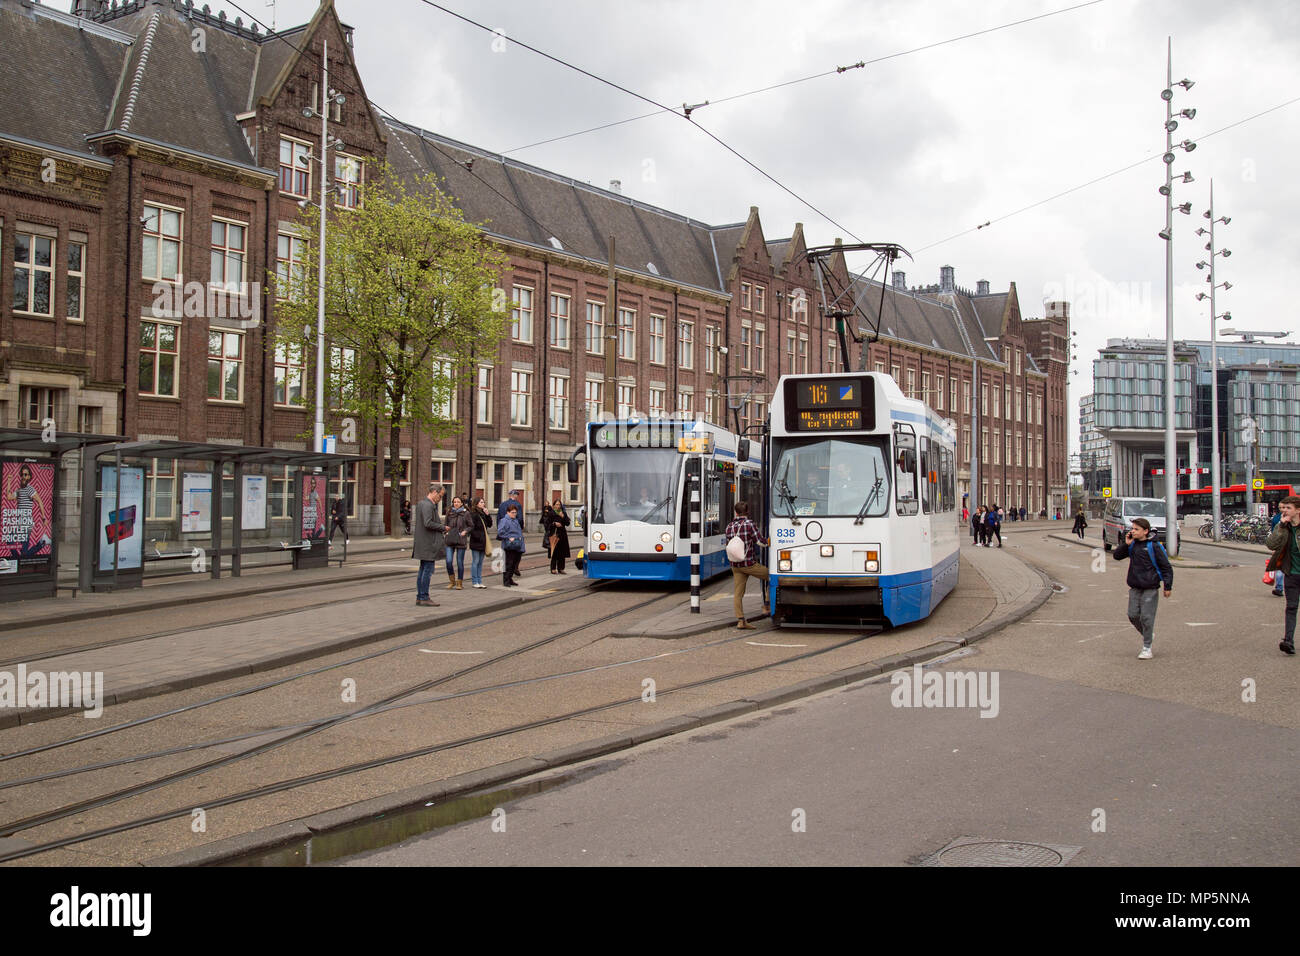 Amsterdam Holland April 2018 A Tramway System Makes Public Transport Easy In The City MP5NNA 